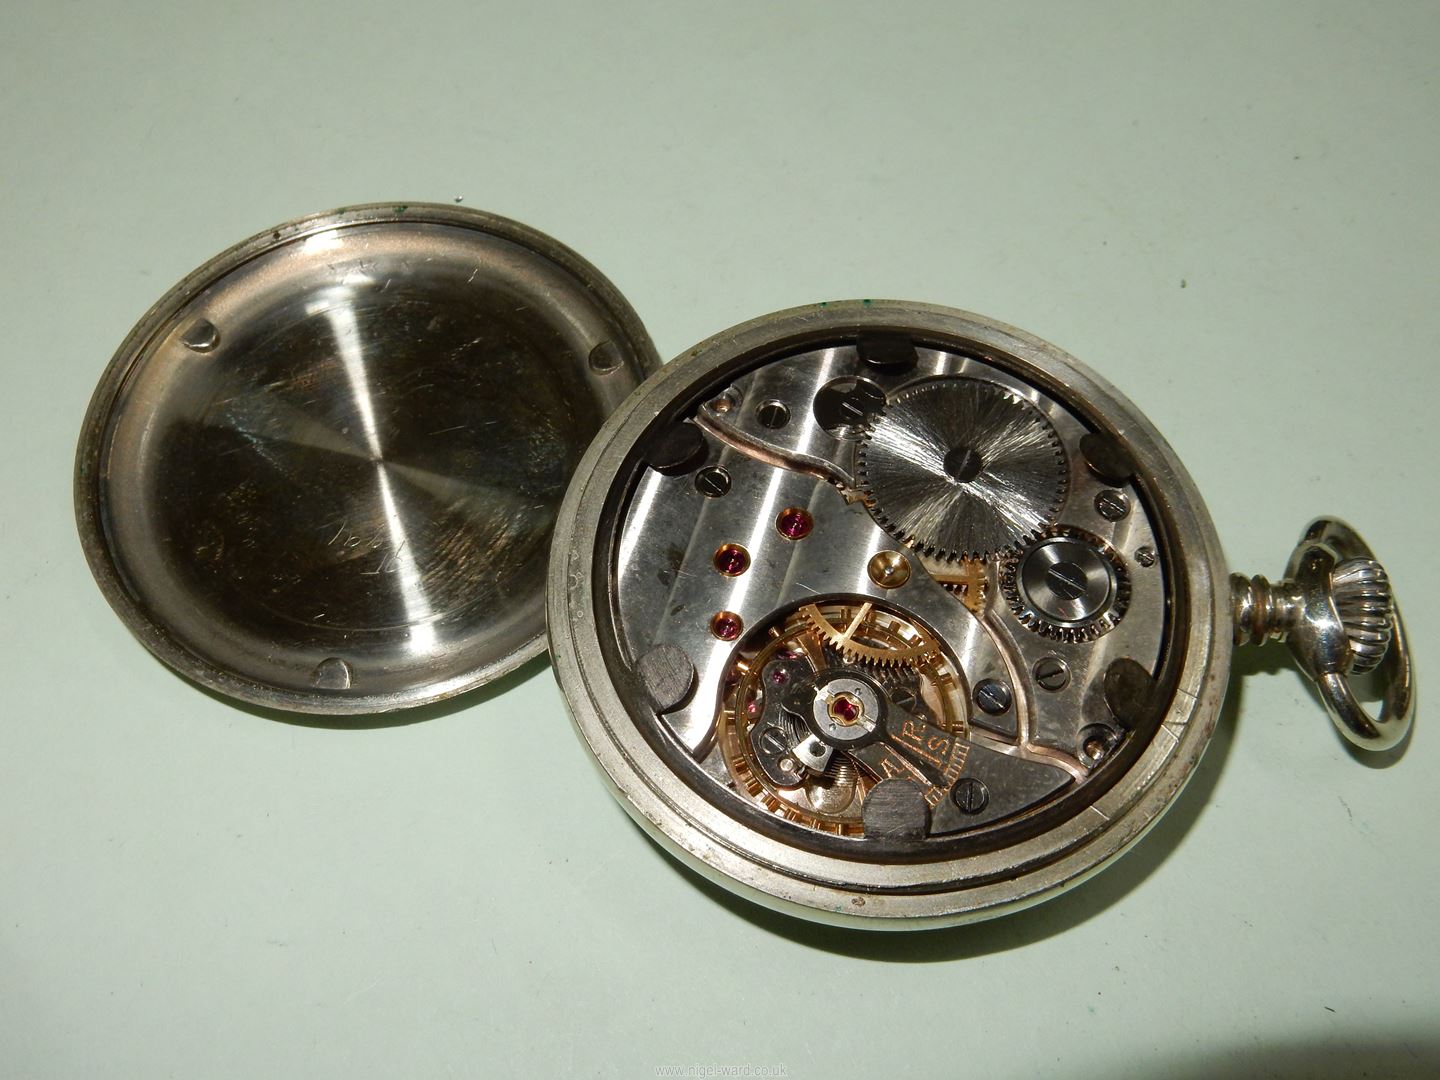 Five crown wound Pocket Watches with inset second hands, - Image 10 of 12